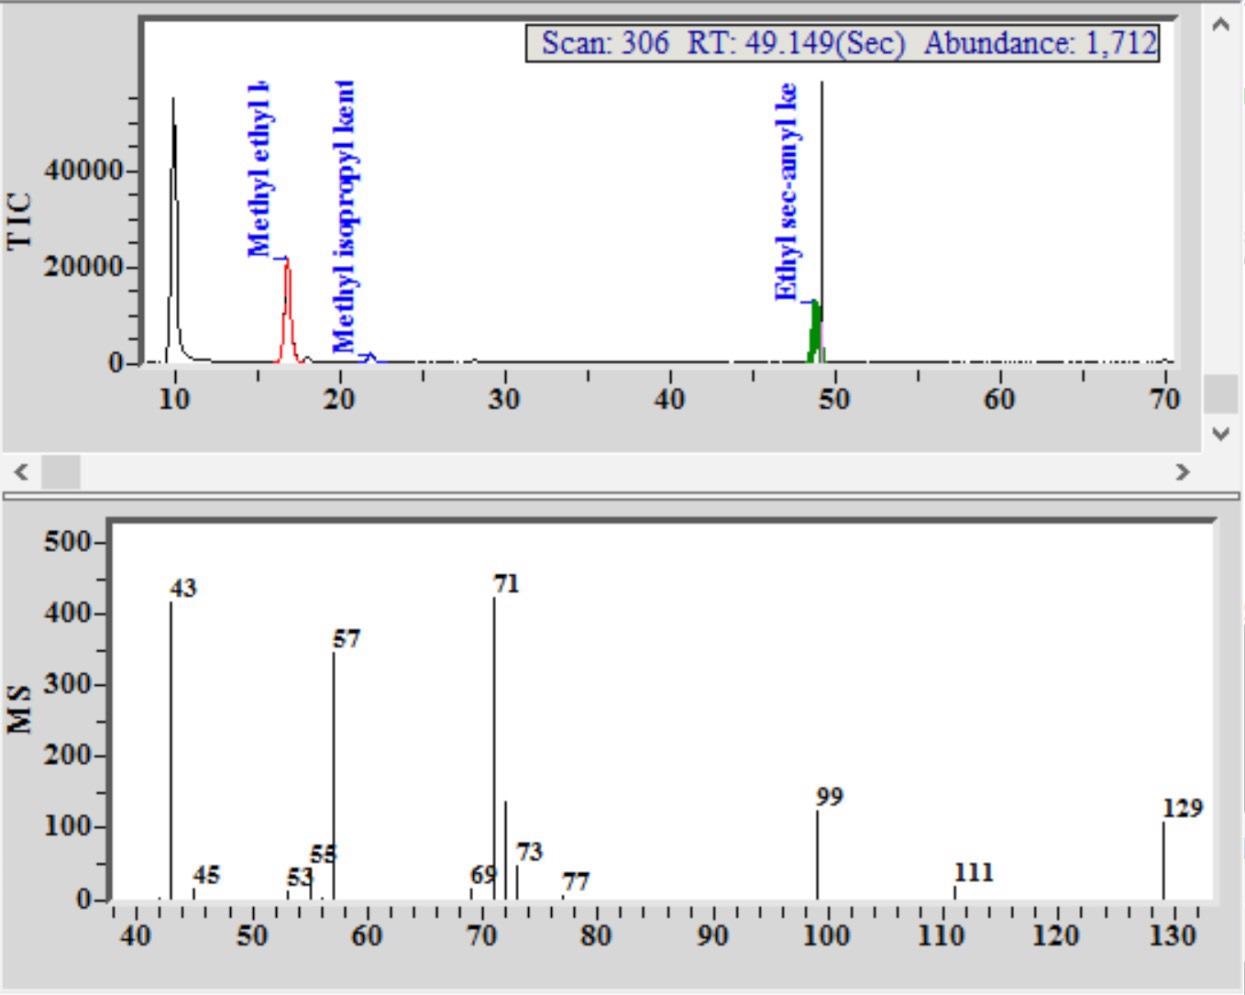 Chromatogram and mass spectrum, with identification of marker components in a Euro spike of a blended Scotch Whisky.